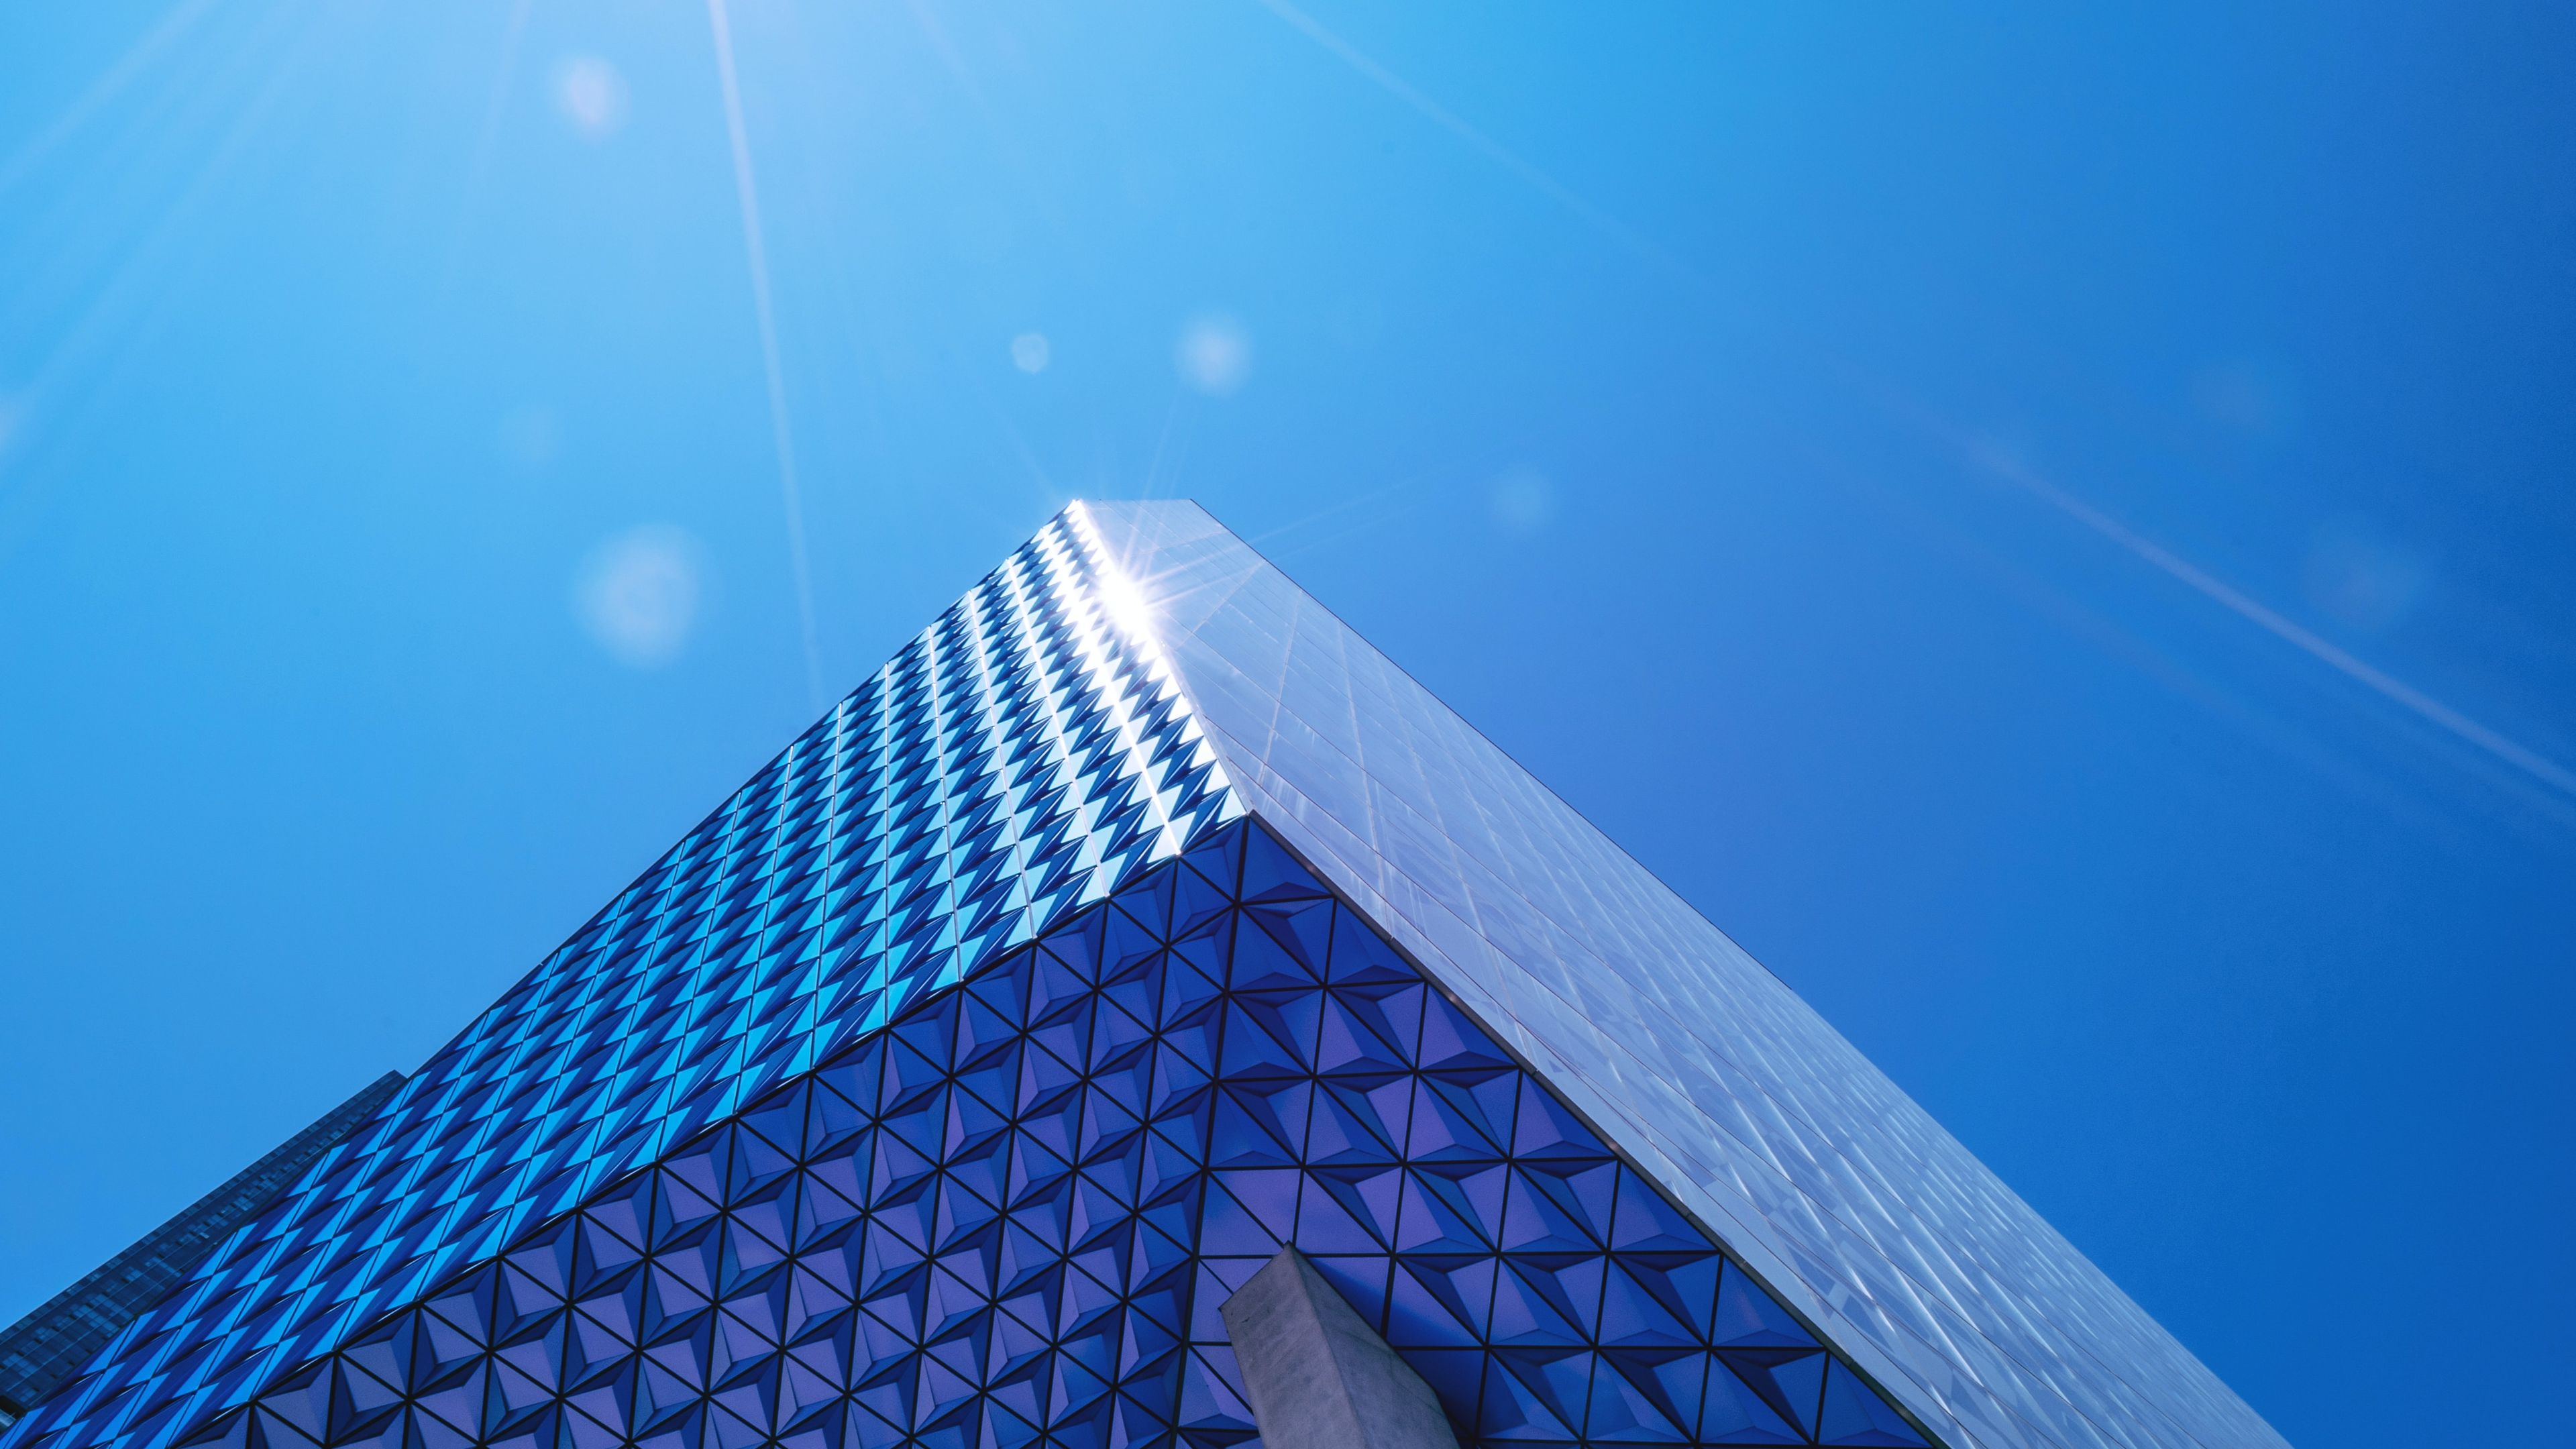 A high rise buiding which glass reflects the blue of a clear sky.